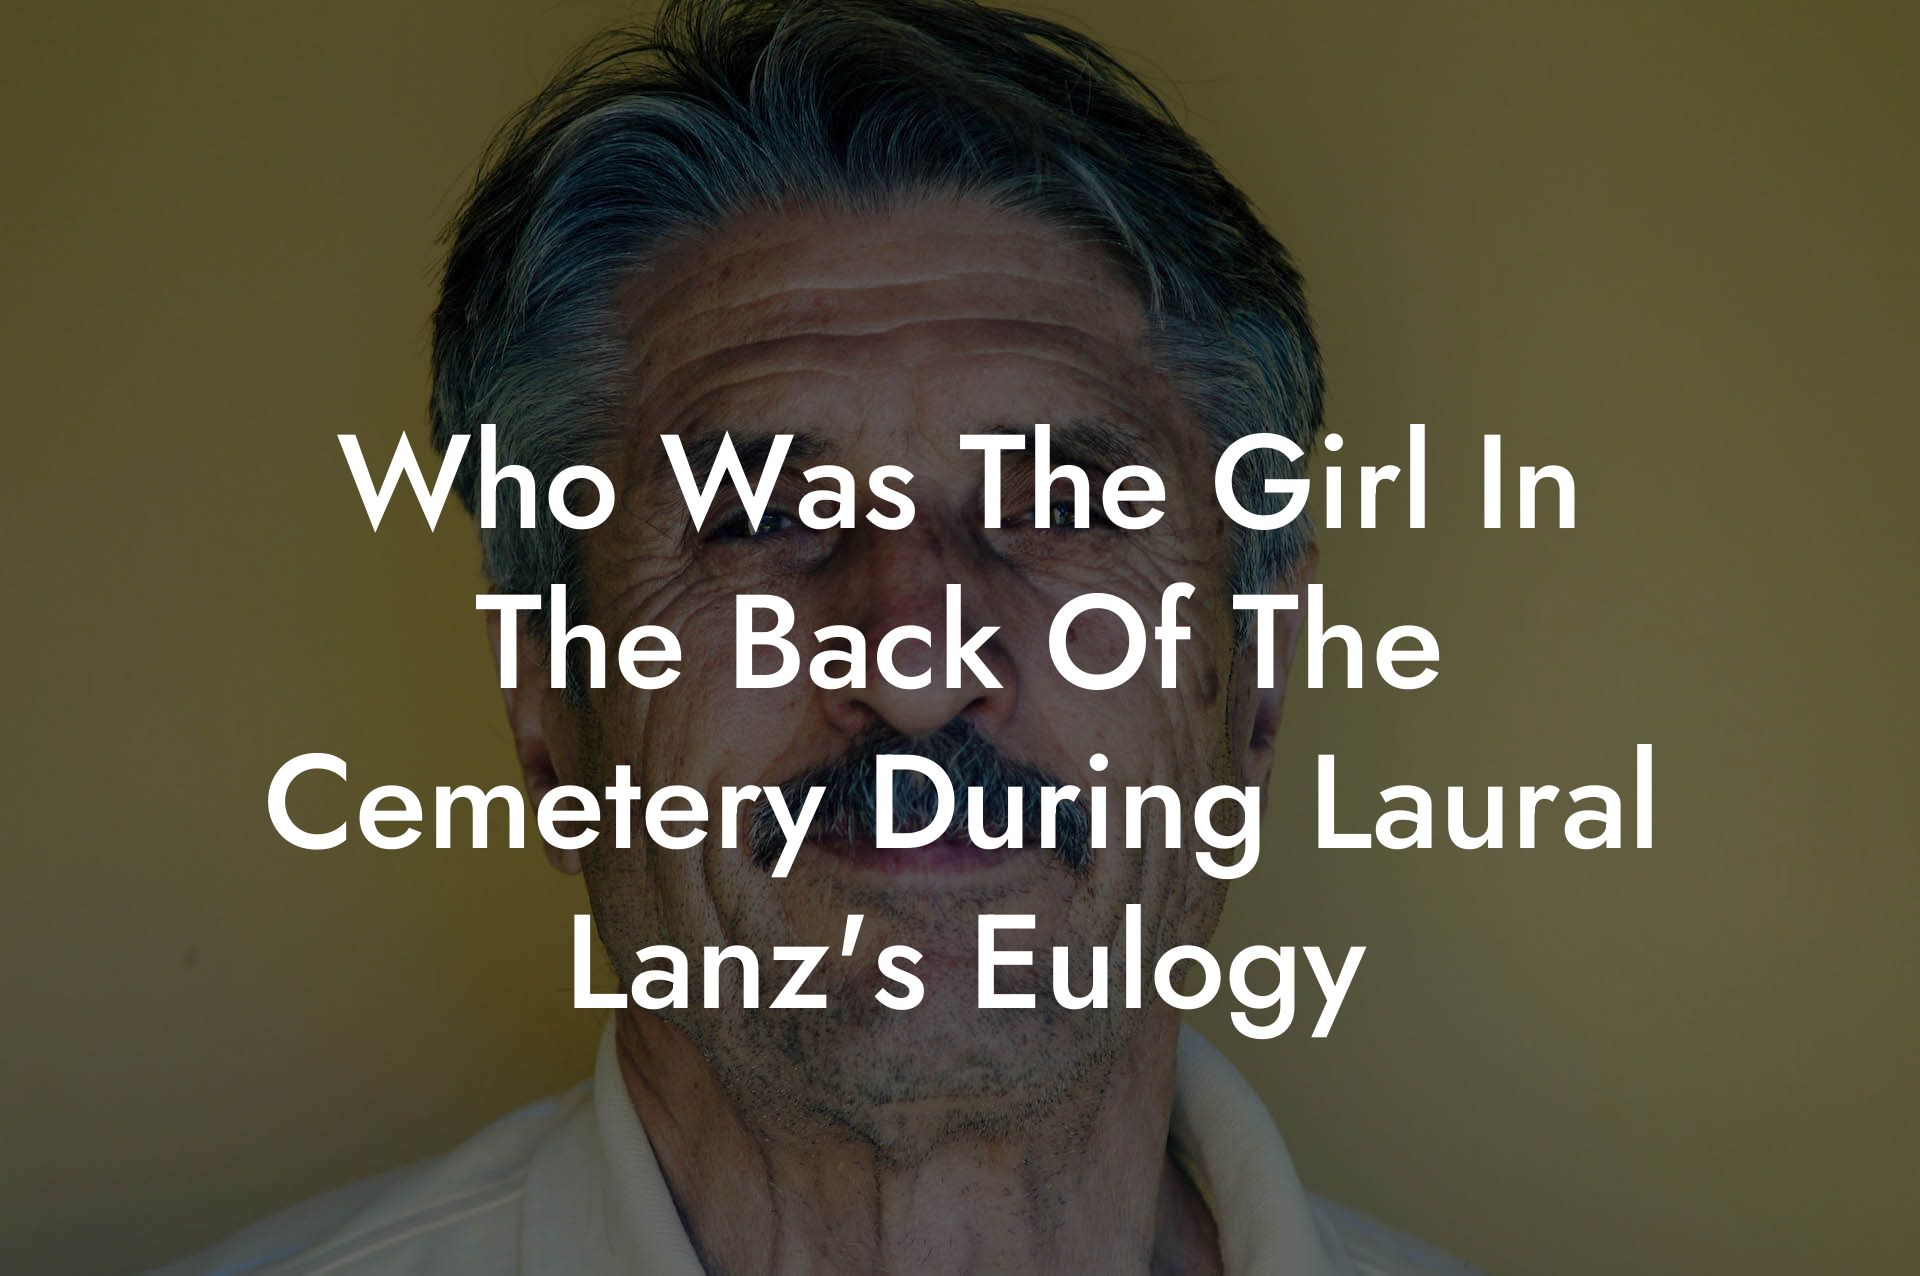 Who Was The Girl In The Back Of The Cemetery During Laural Lanz's Eulogy